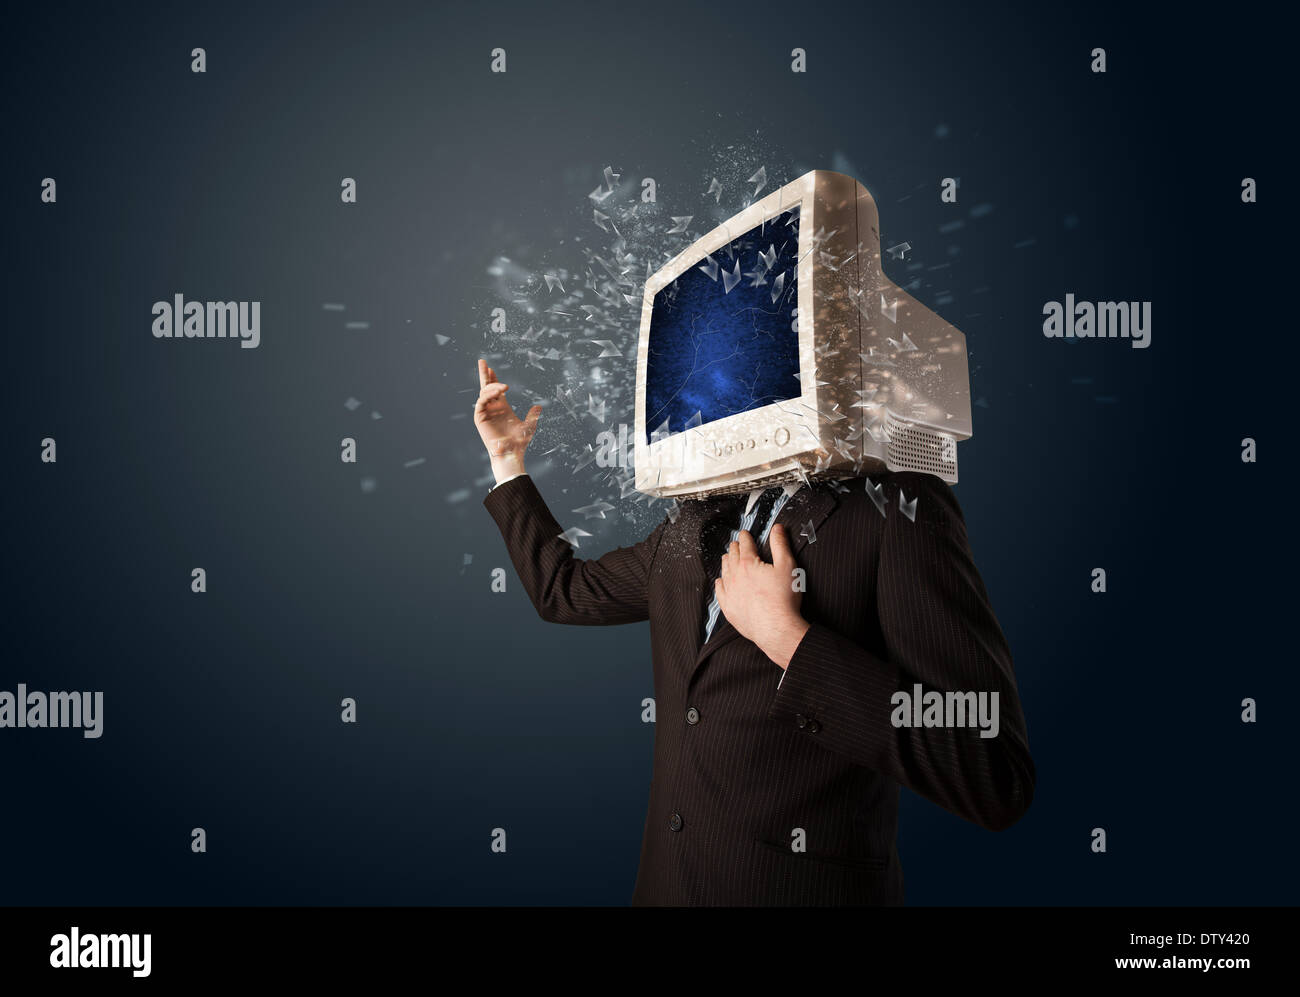 Computer monitor screen exploding on a young persons head Stock Photo